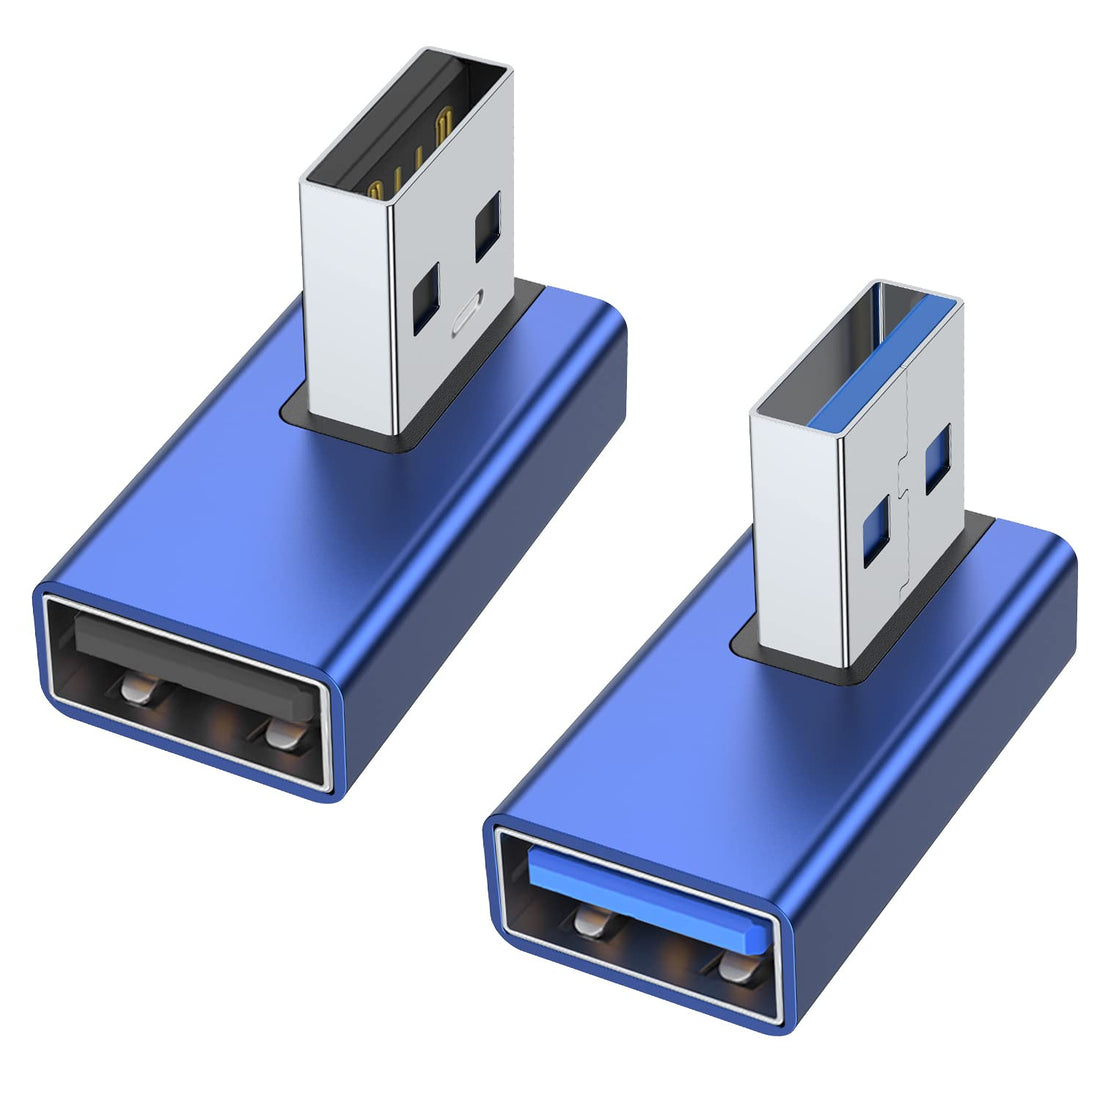 AreMe 90 Degree USB 3.0 Adapter 2 Pack, Left and Right Angle USB A Male to Female Converter Extender for PC, Laptop, USB A Charger, Power Bank and More (Blue)